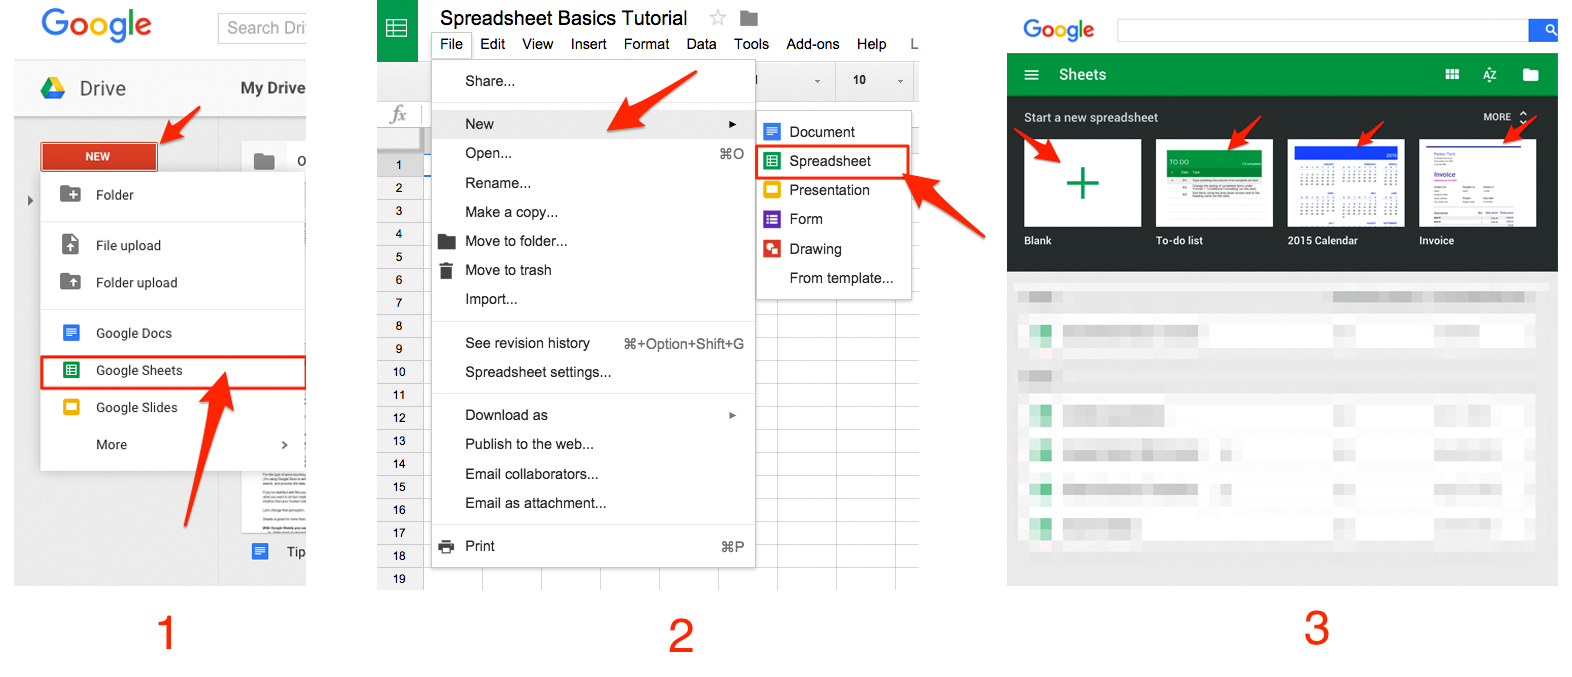 Google Drive Spreadsheet Intended For Google Sheets 101: The Beginner's Guide To Online Spreadsheets  The